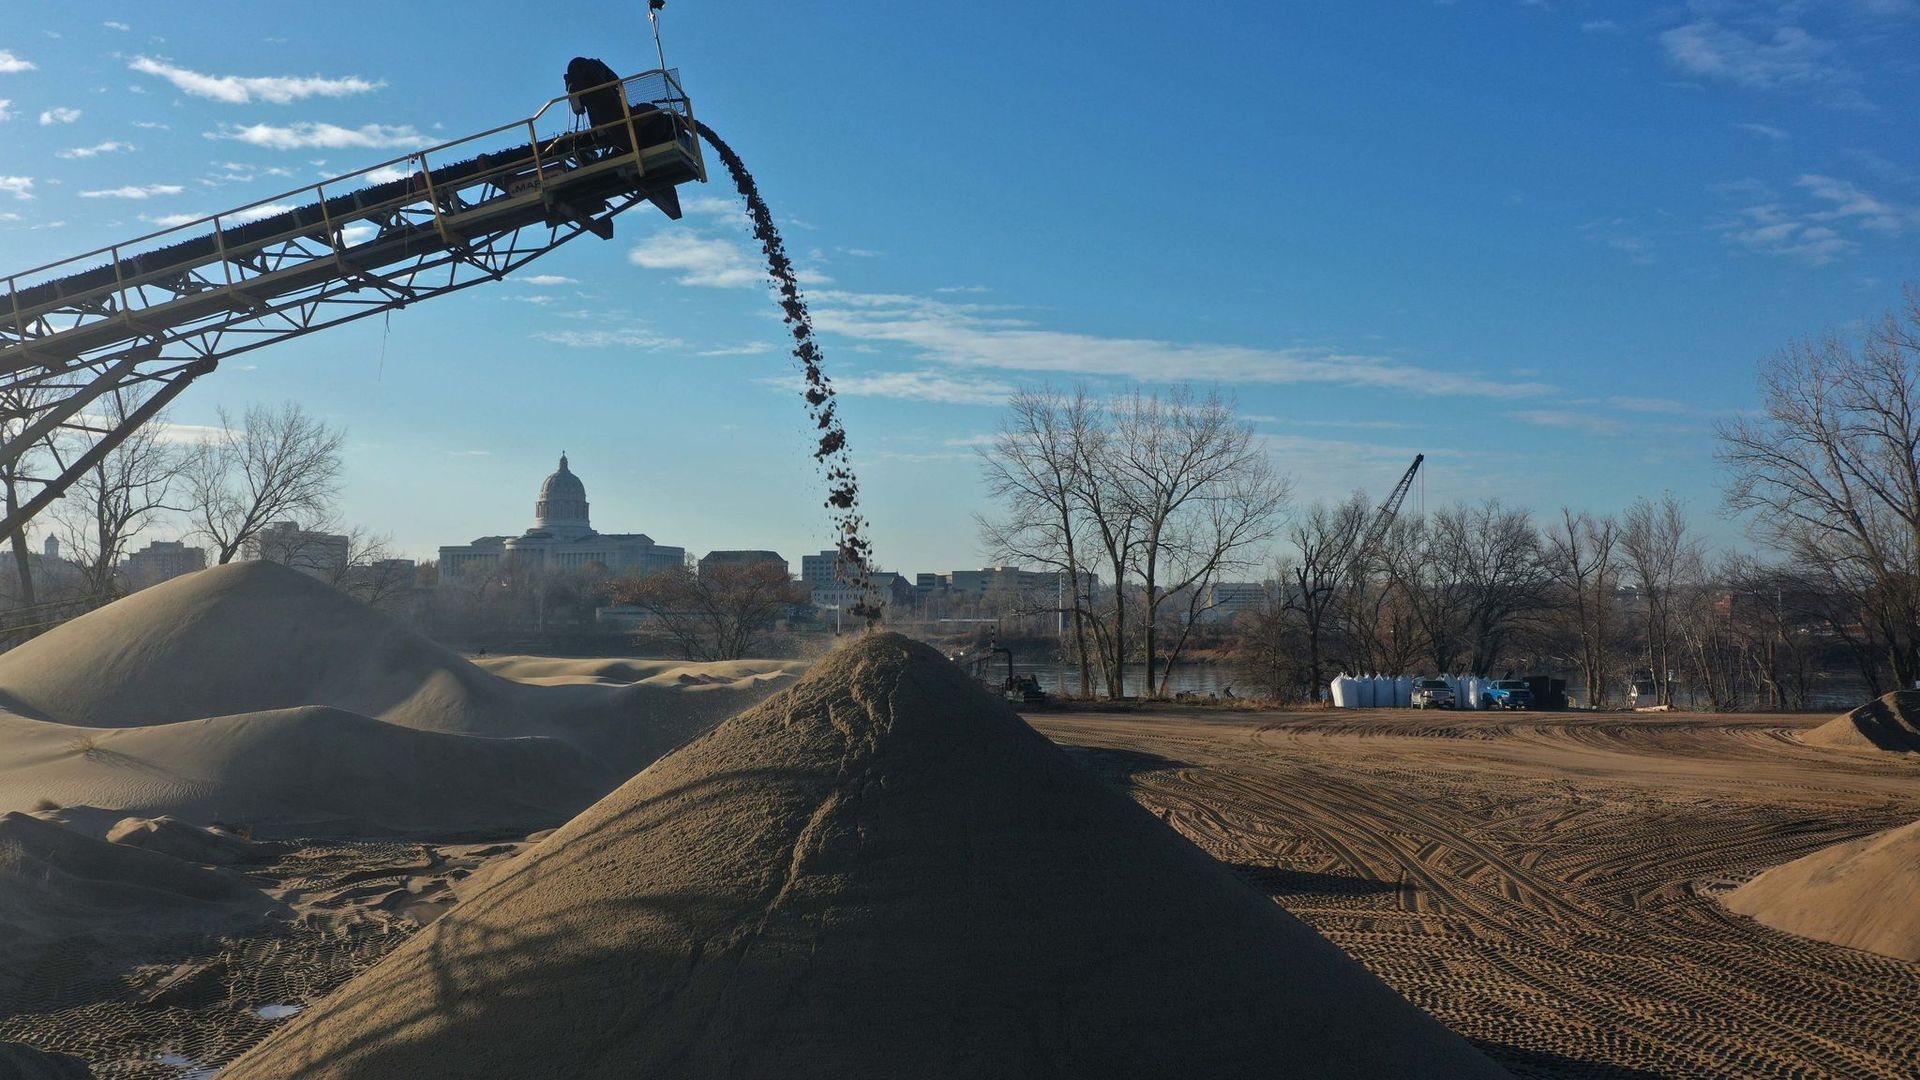 Farmer Companies’ Mines Produce the Highest Quality Frac Sand in the Midwest & Beyond